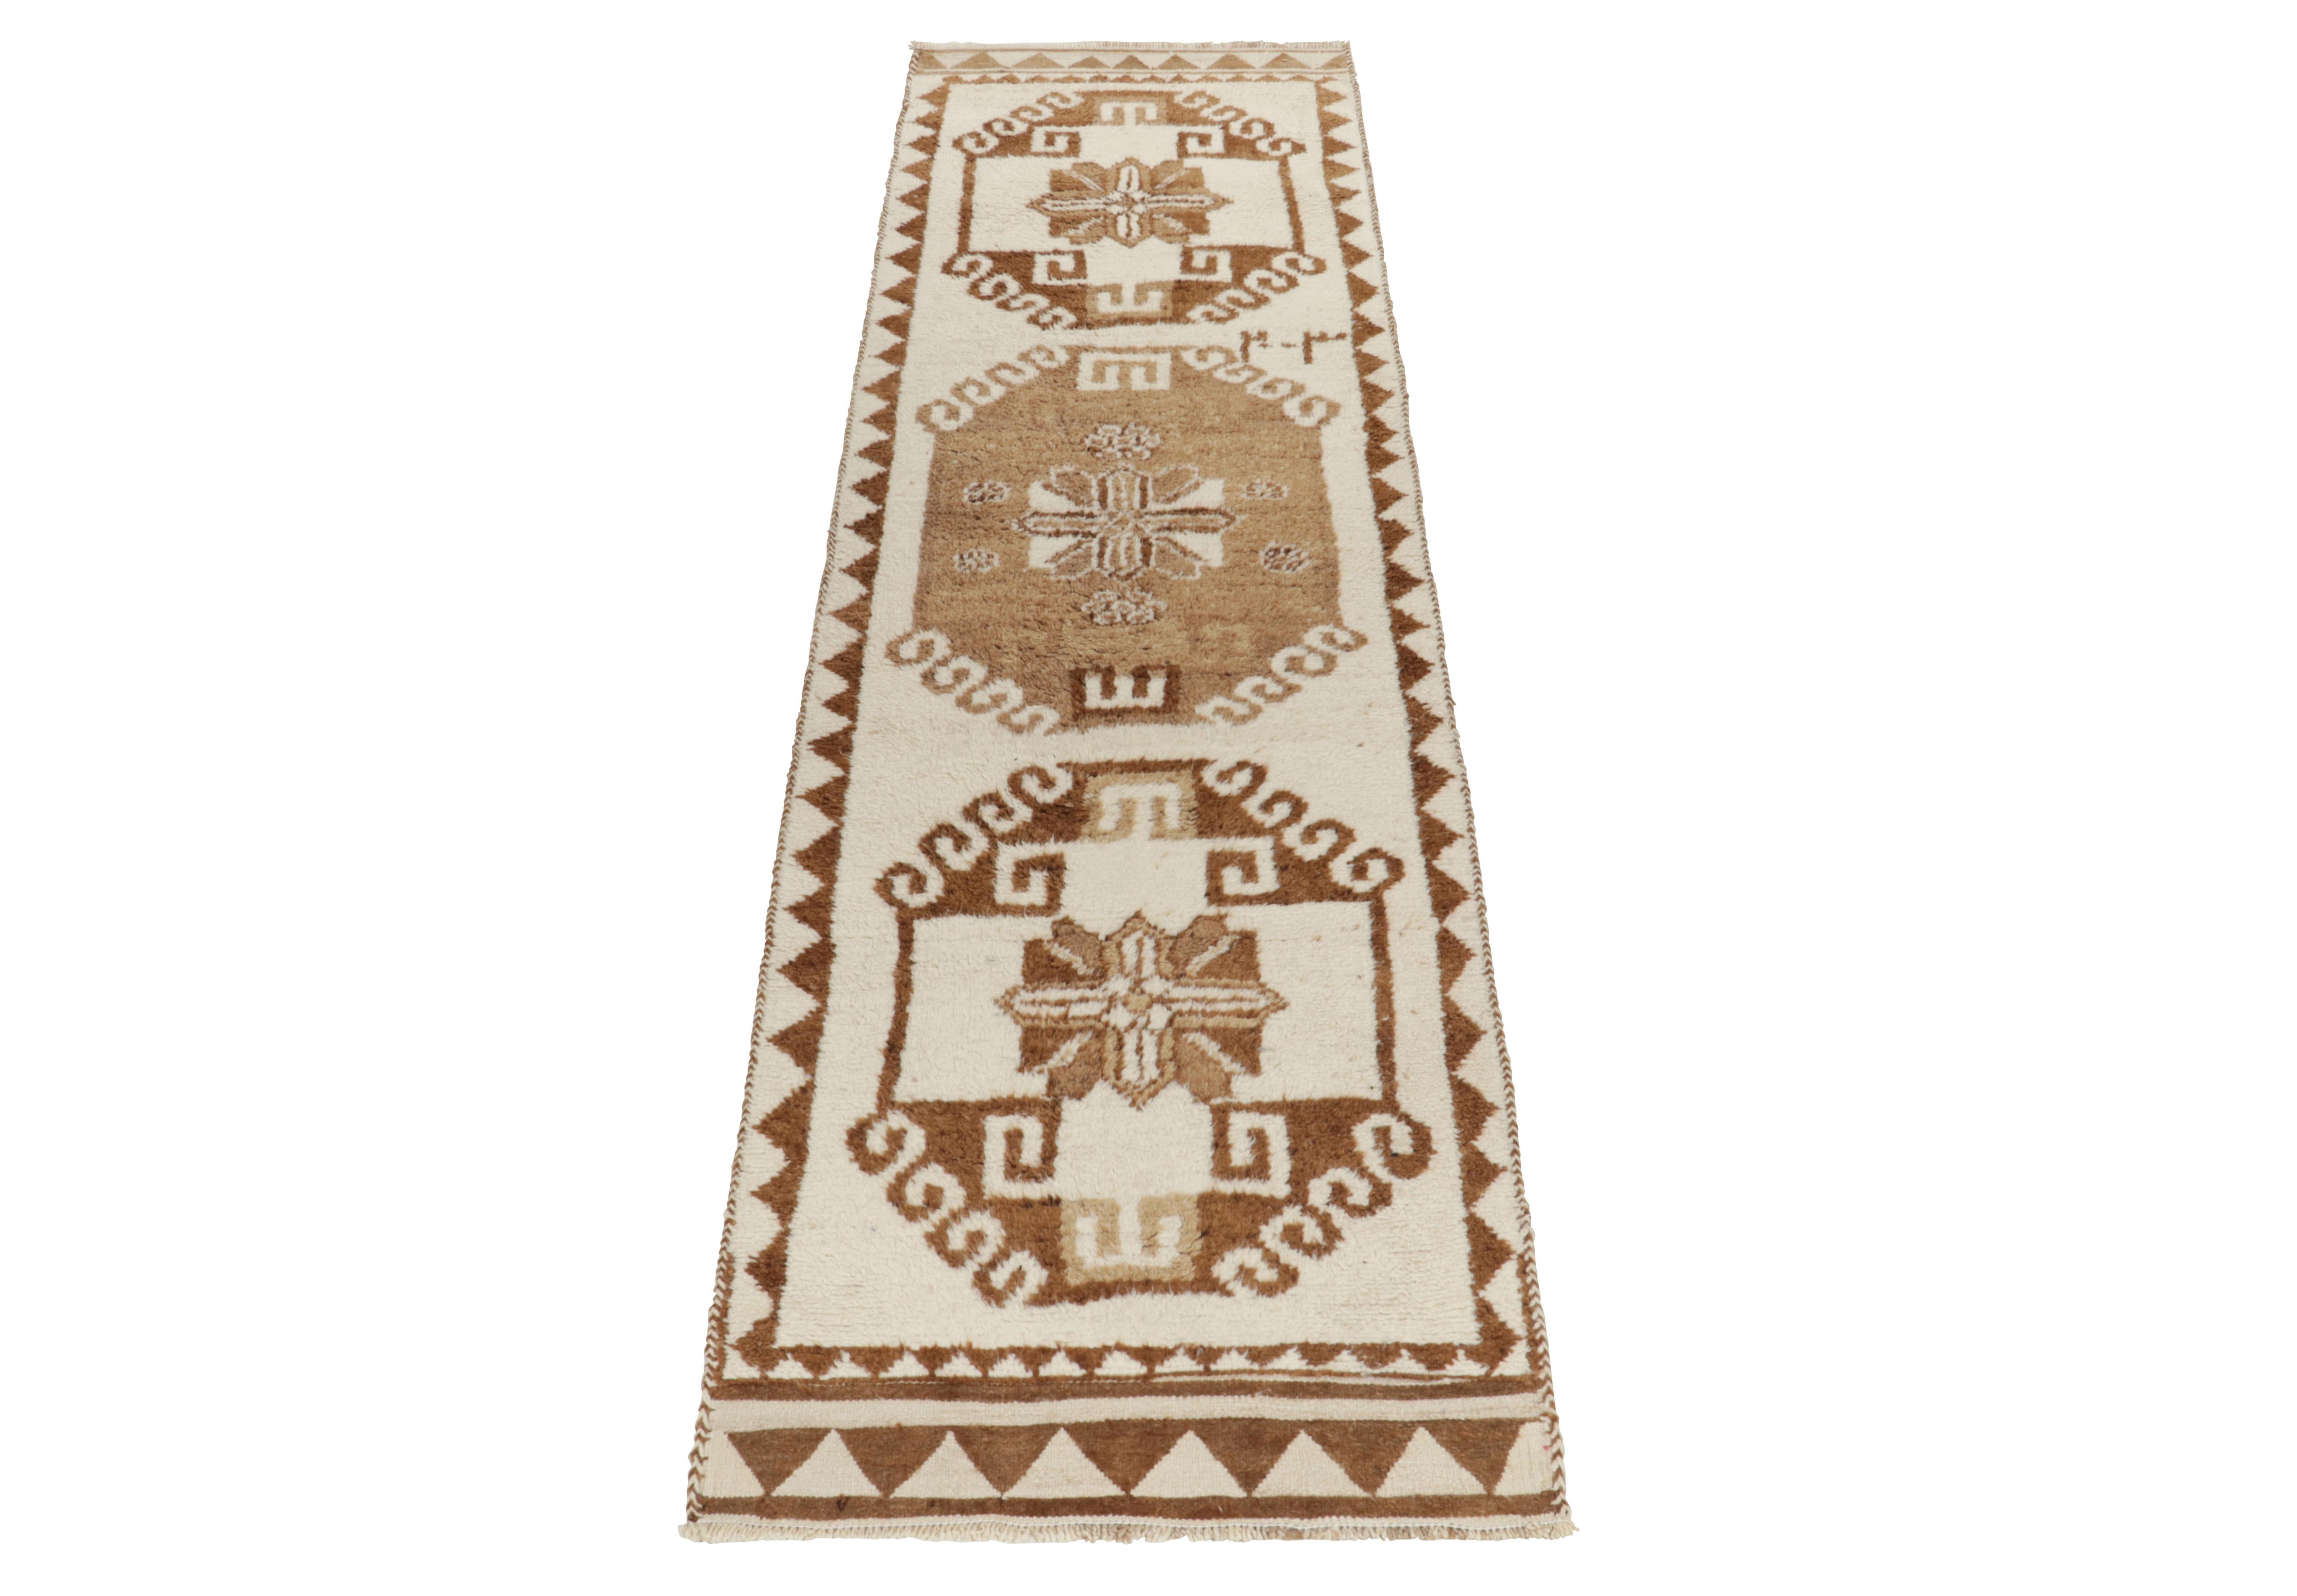 From Rug & Kilim’s vintage selections, a 3x12 hand-knotted wool runner of uniquely bright hues for nomadic inspirations. 

This 1950s tribal piece showcases traditional motifs sitting peacefully like medallions on the field in crisp white &